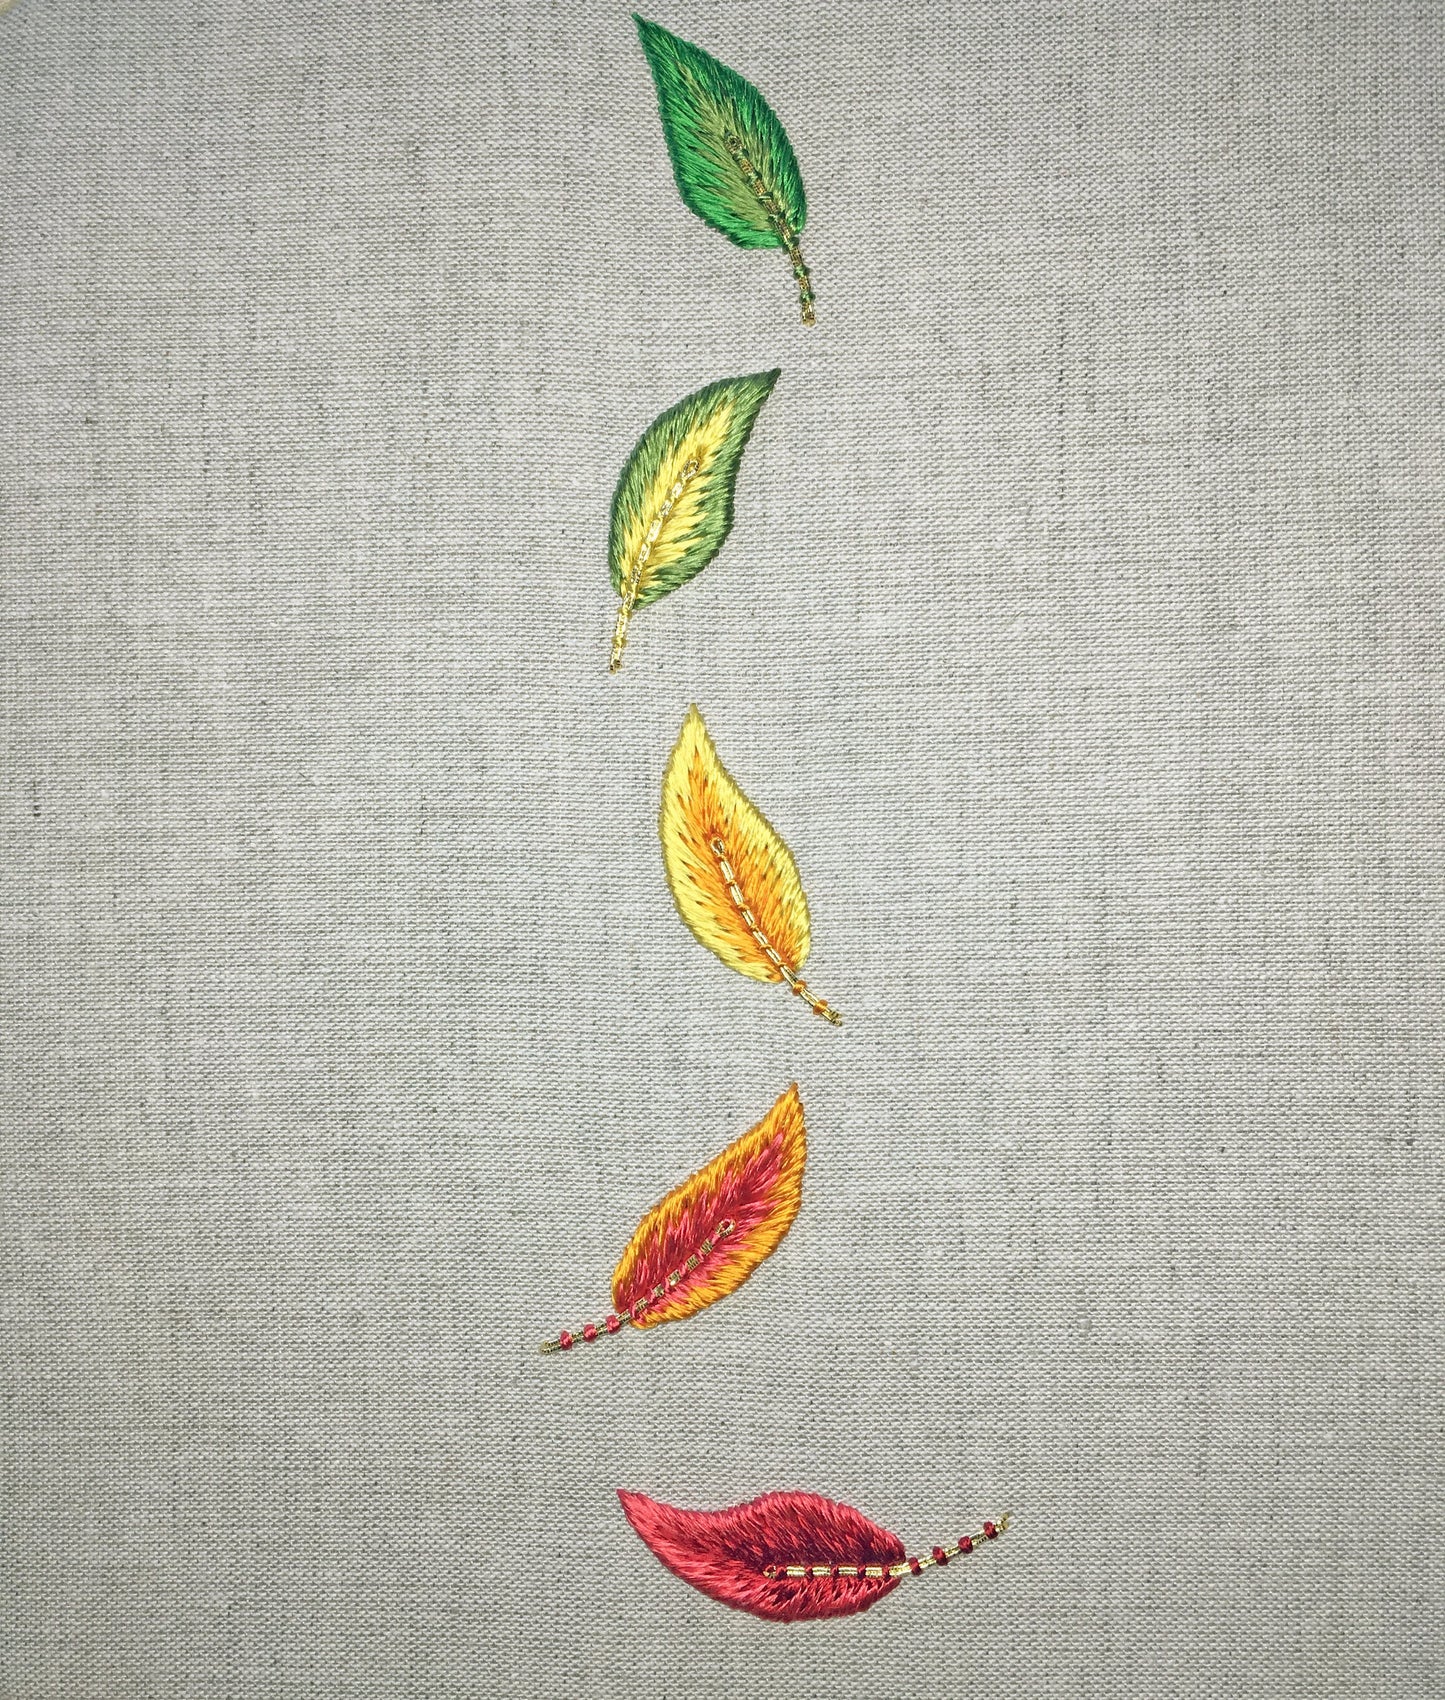 'Changing Leaves' Silk Shading Embroidery Kit